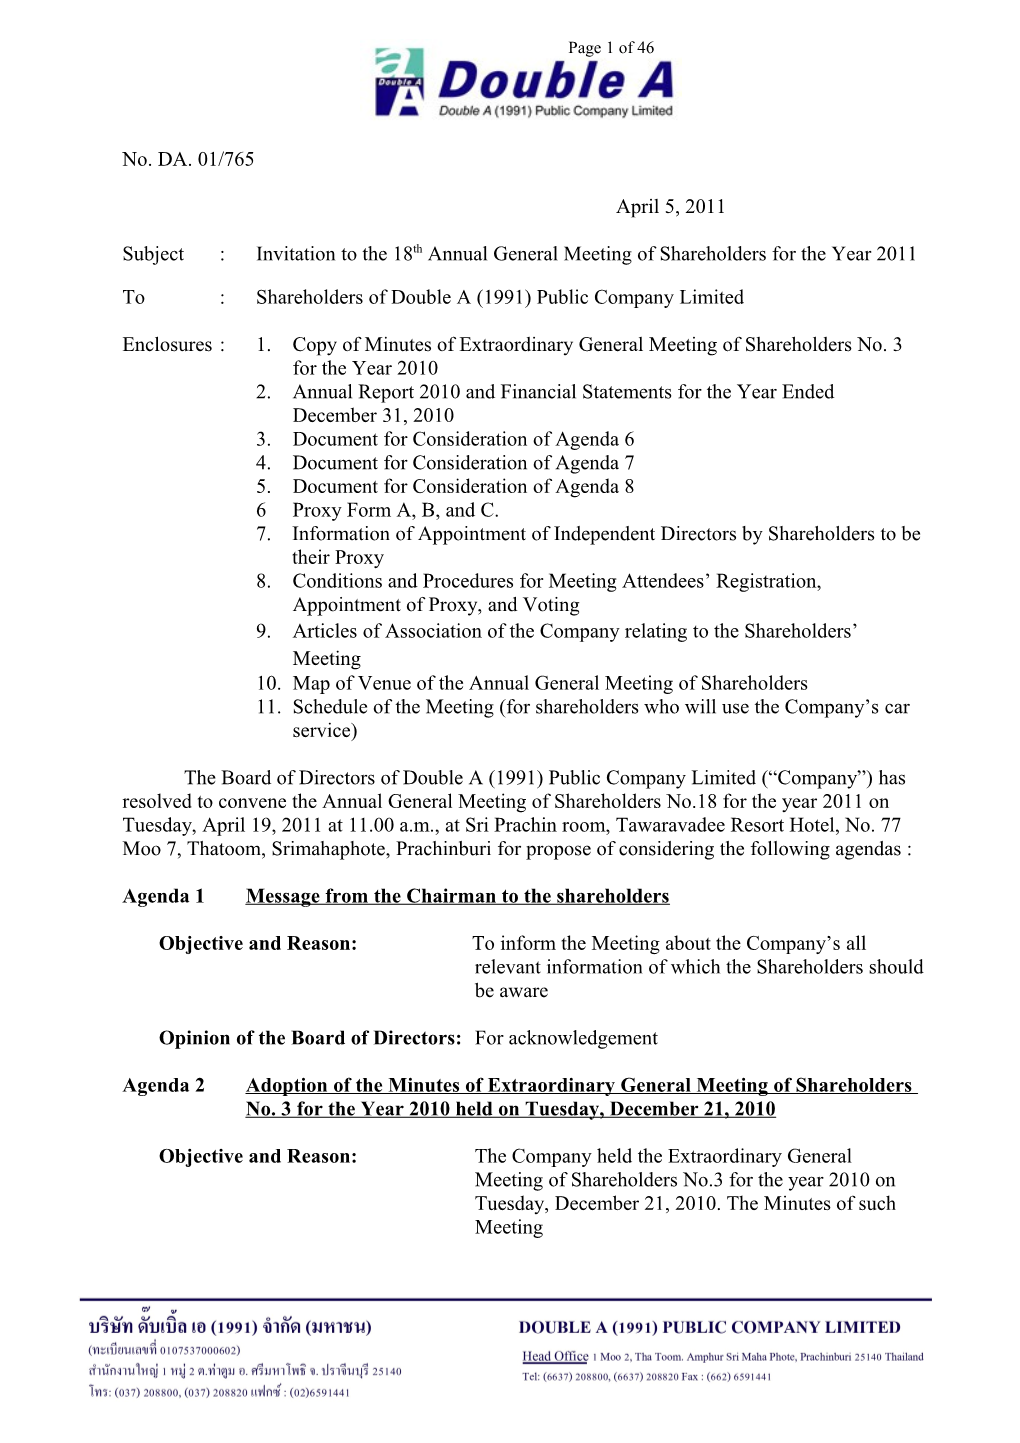 Subject : Invitation to the 18Th Annual General Meeting of Shareholders for the Year 2011